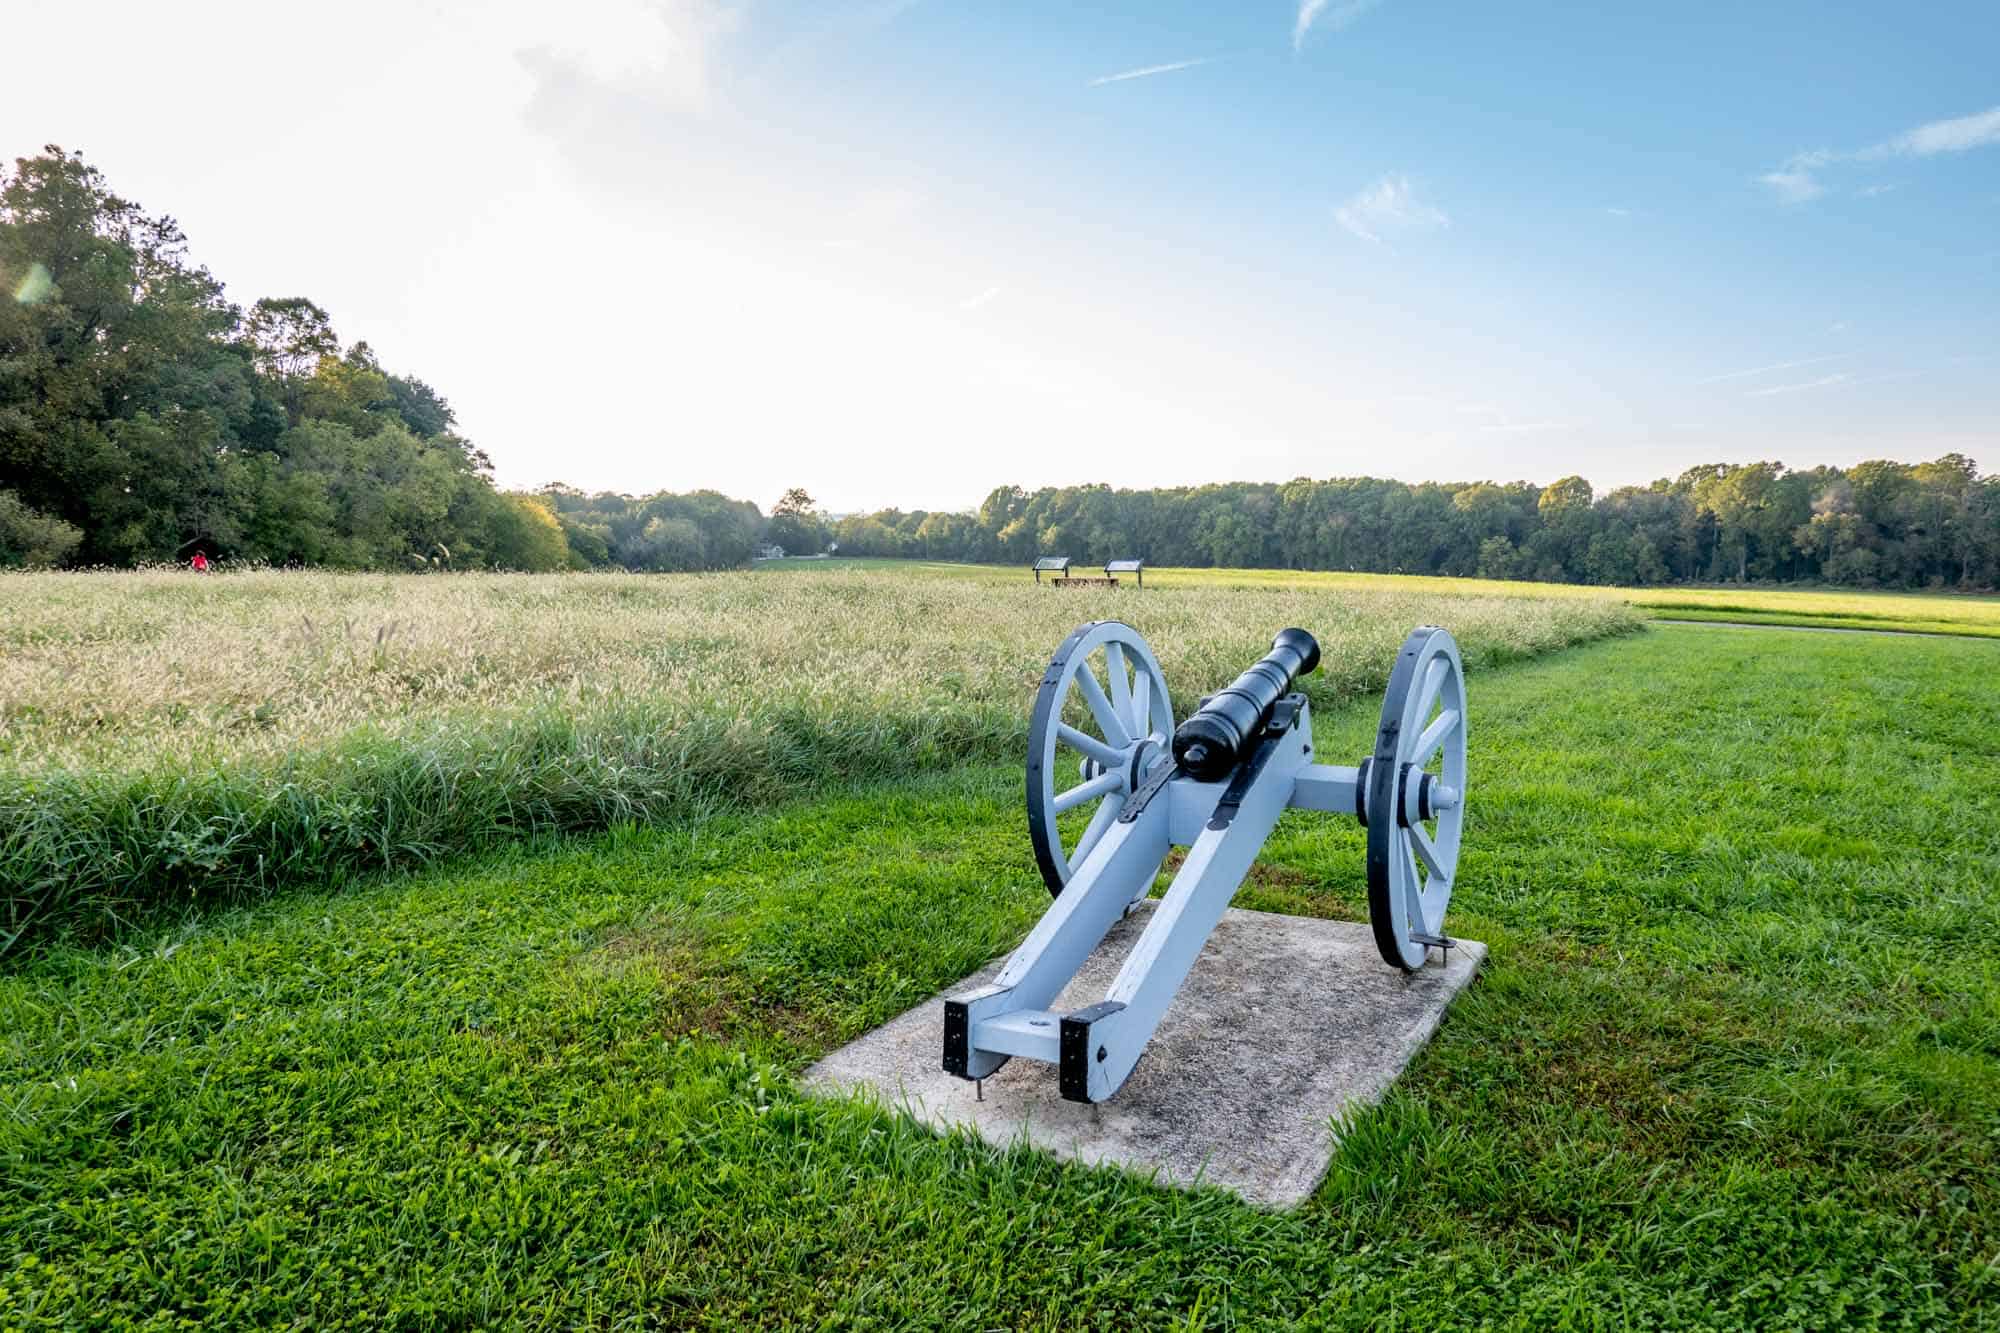 Blue cannon on a grassy field surrounded by trees